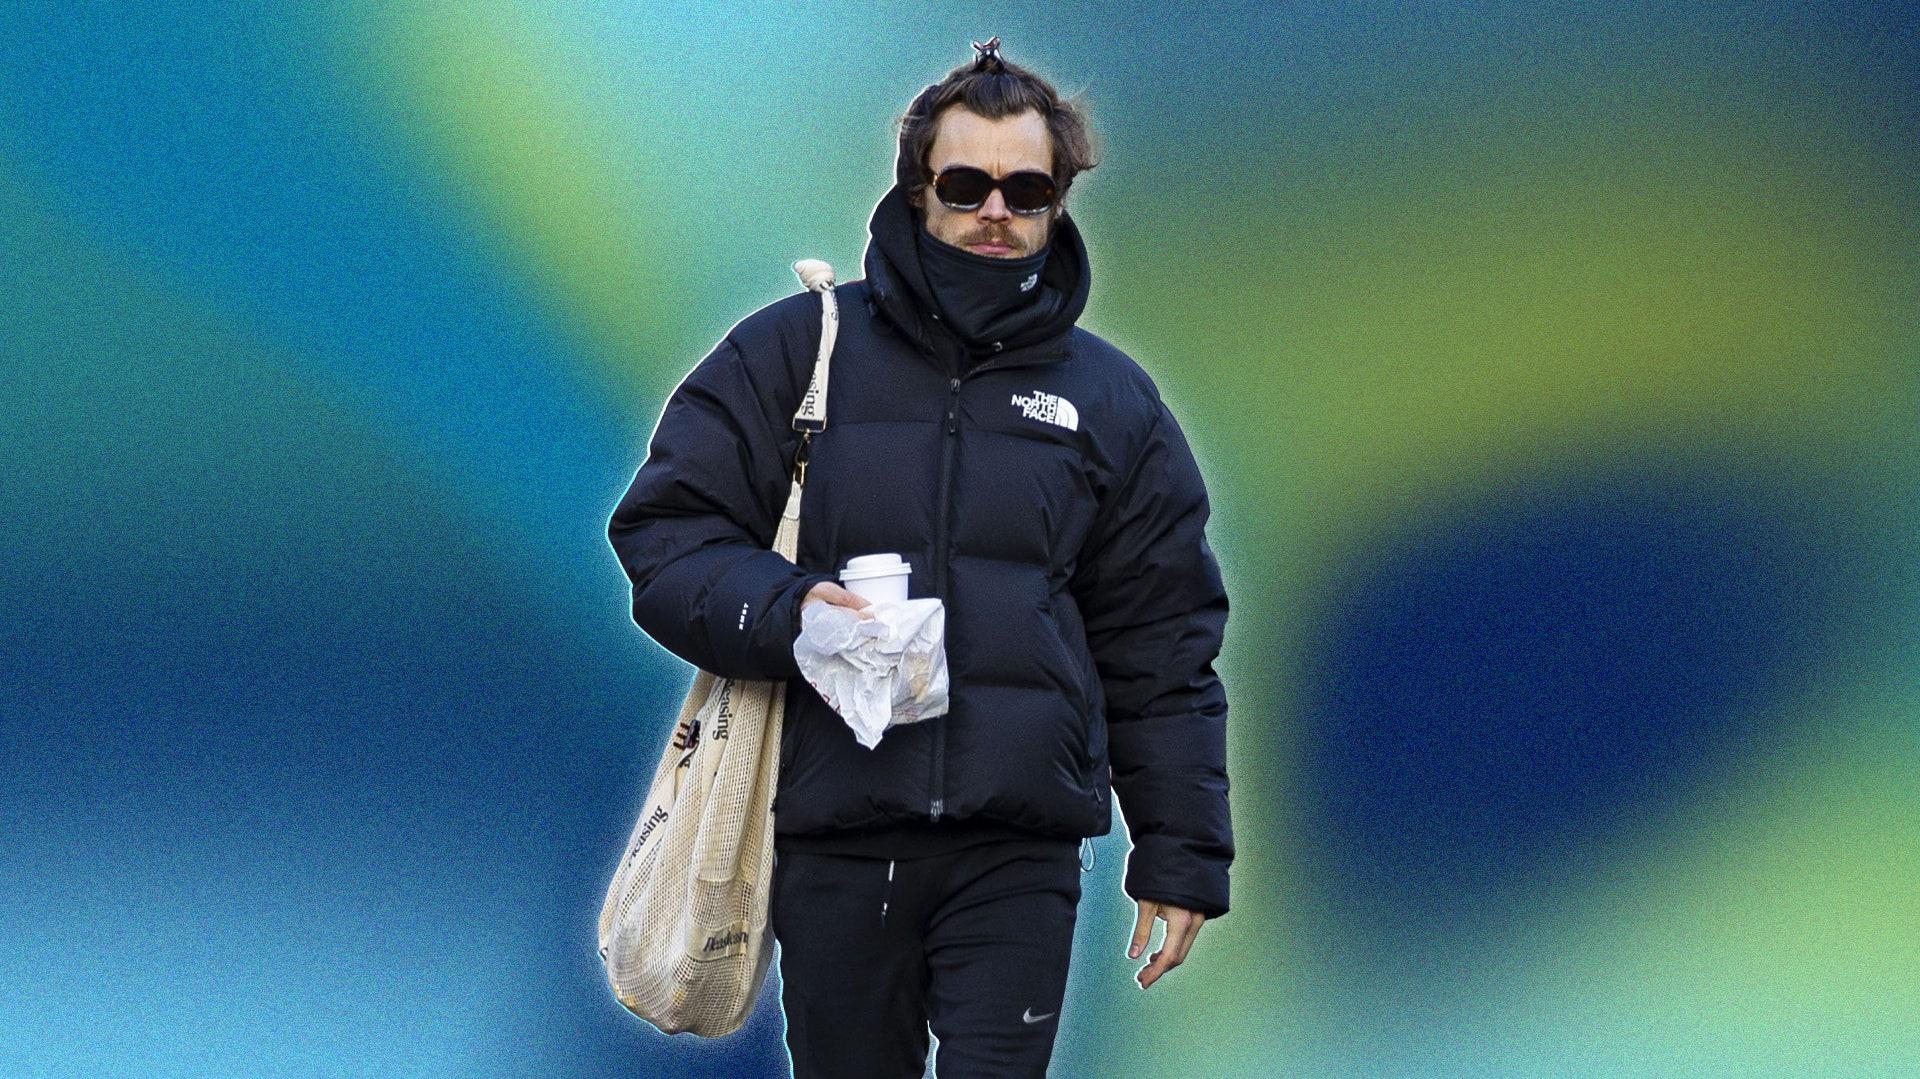 If This Classic North Face Jacket Is Good Enough For Harry Styles